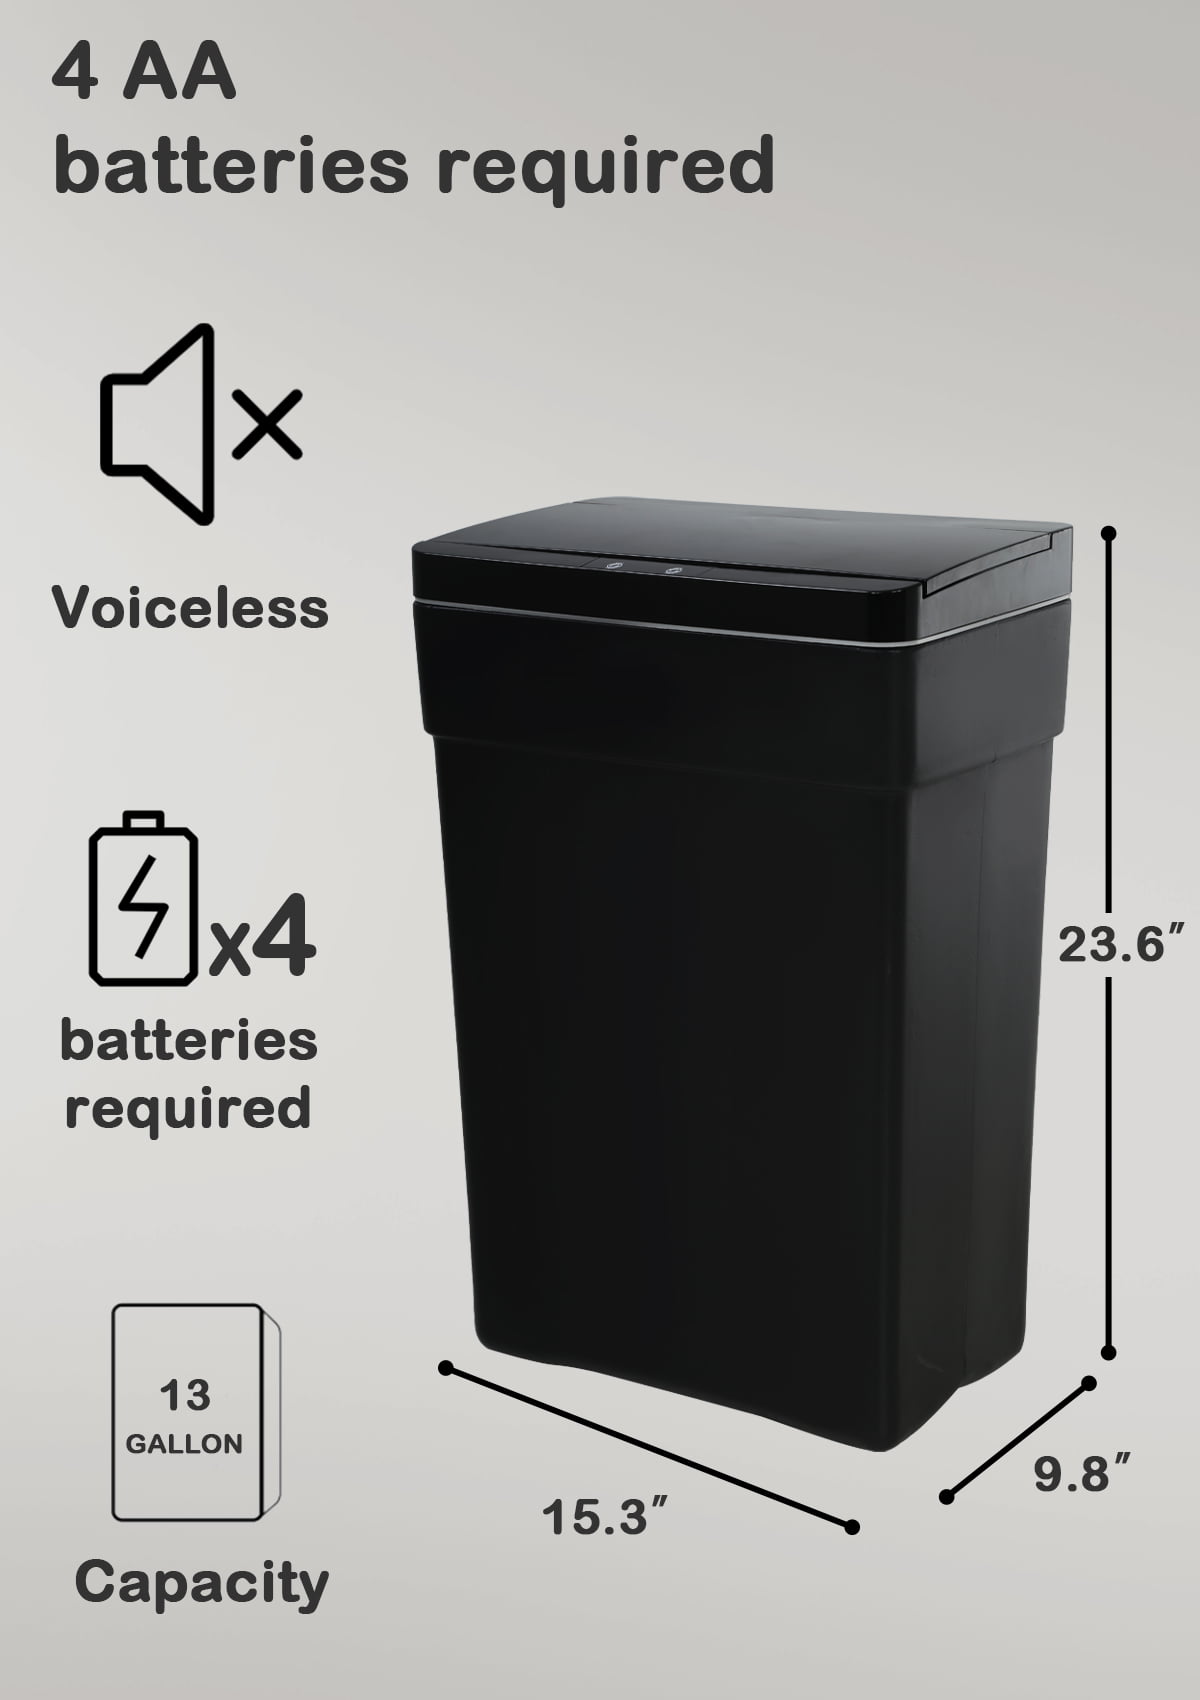  MKDLUFEI Kitchen Trash Can 13 Gallon Trash Can with Lid, Motion  Sensor Touchless Trash Can Plastic Automatic Garbage Can, Soft Close,50  Liter / 13 Gallon Airtight Waste Bin for Kitchen Home